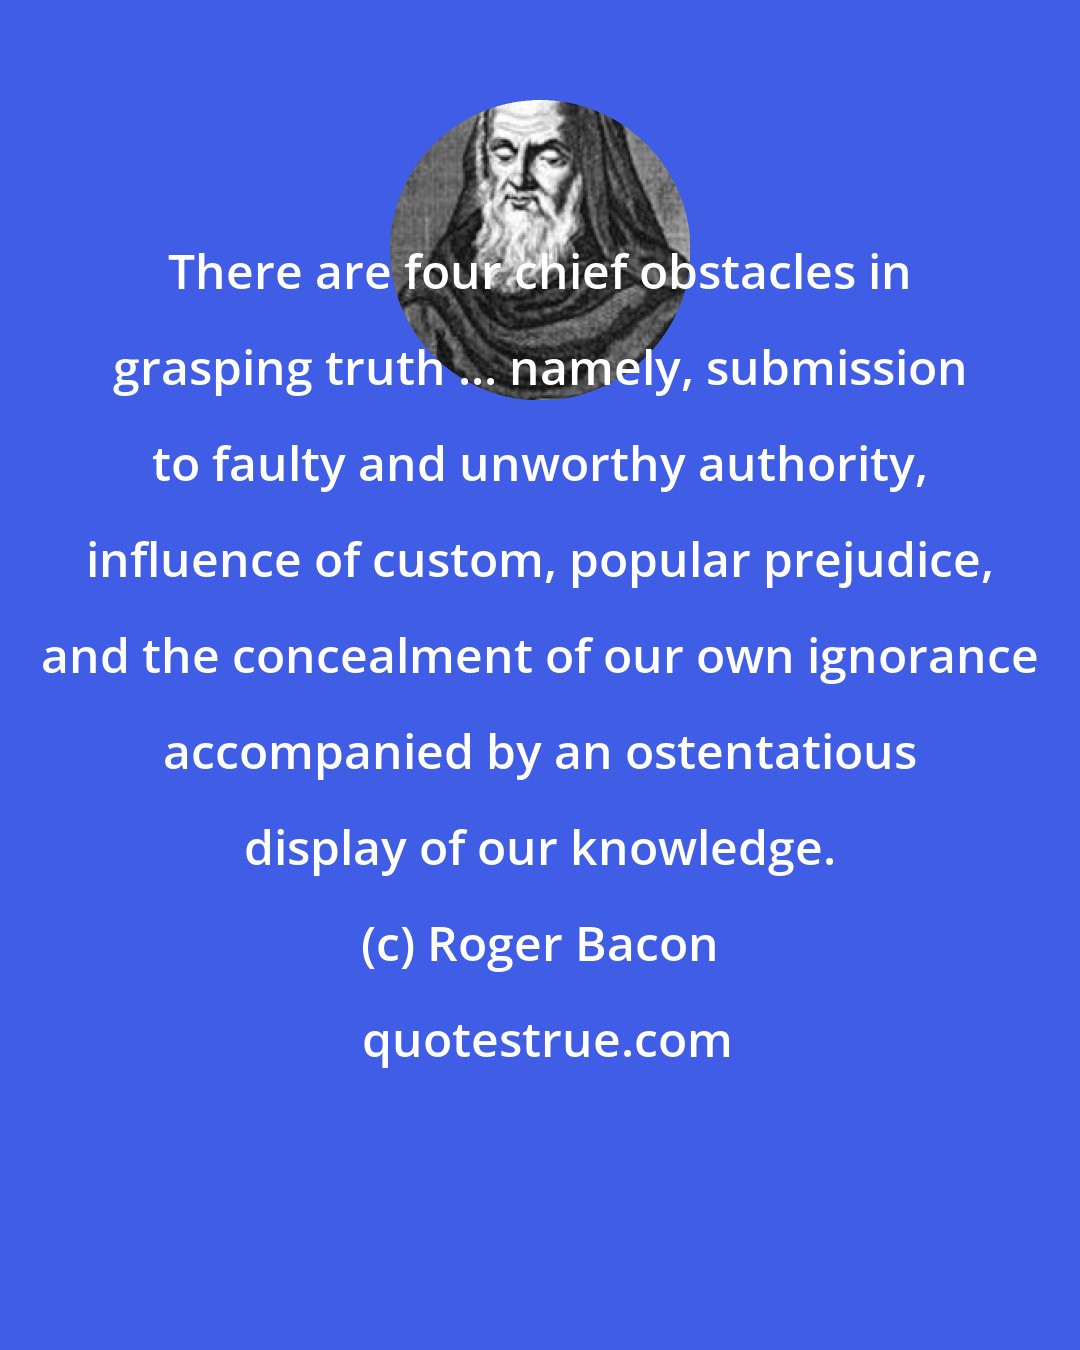 Roger Bacon: There are four chief obstacles in grasping truth ... namely, submission to faulty and unworthy authority, influence of custom, popular prejudice, and the concealment of our own ignorance accompanied by an ostentatious display of our knowledge.